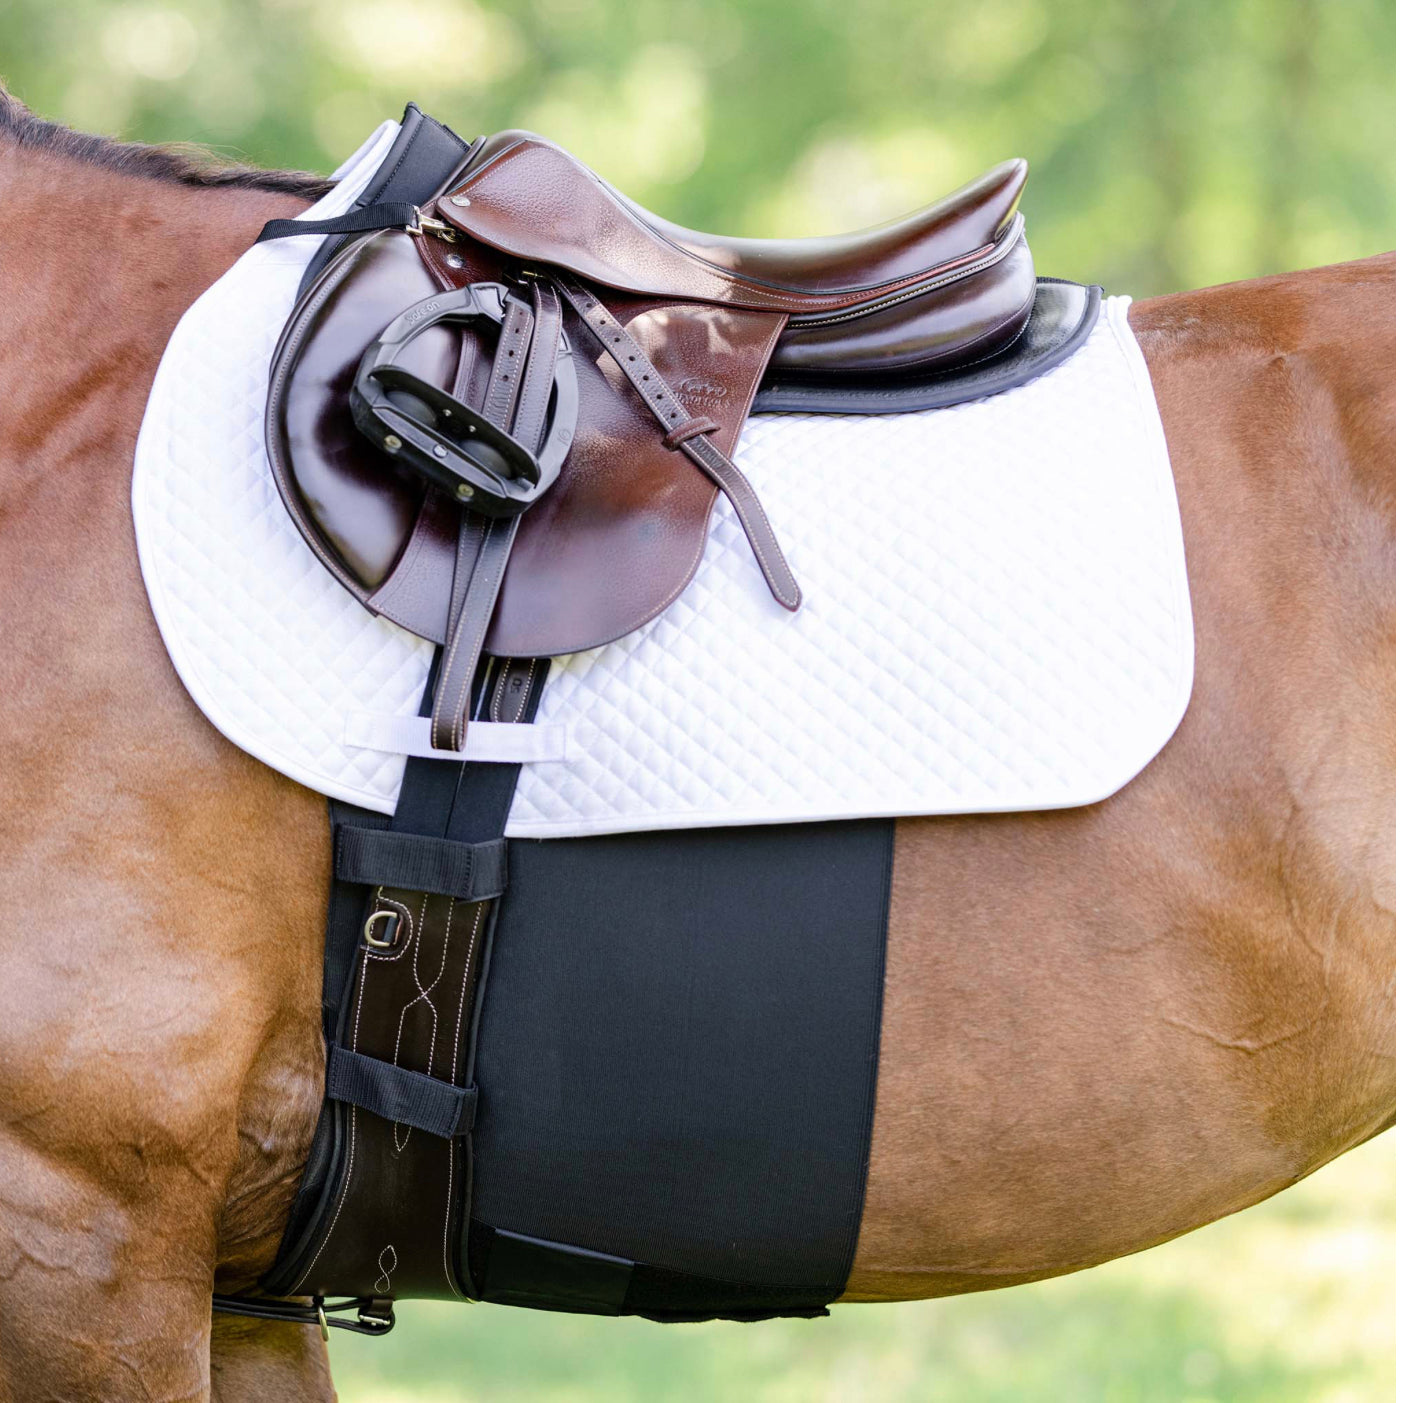 Equifit BellyBand+